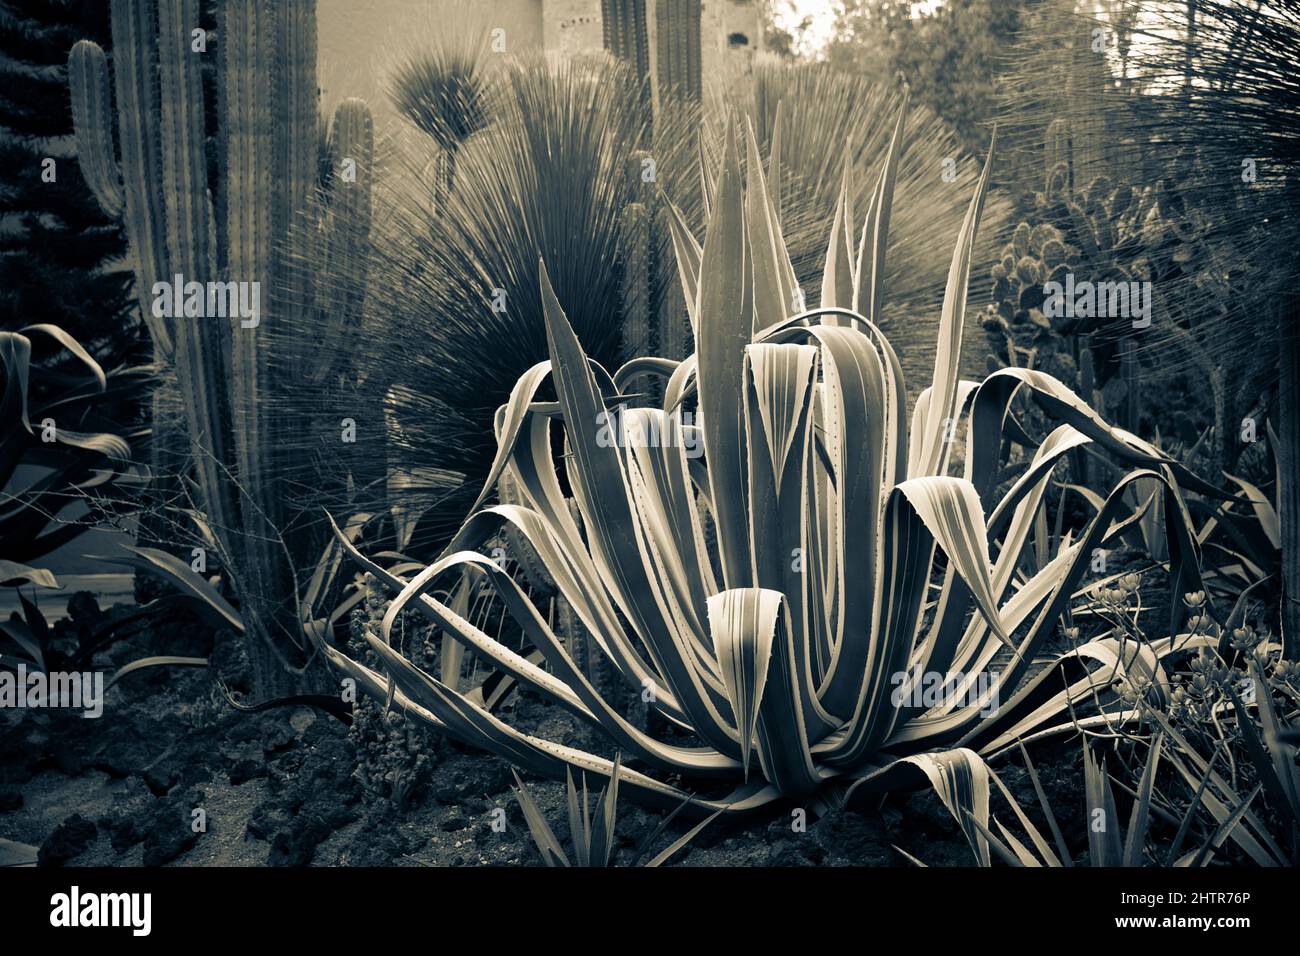 Yucca is a genus of perennial shrubs and trees in the family Asparagaceae, subfamily Agavoideae. Stock Photo